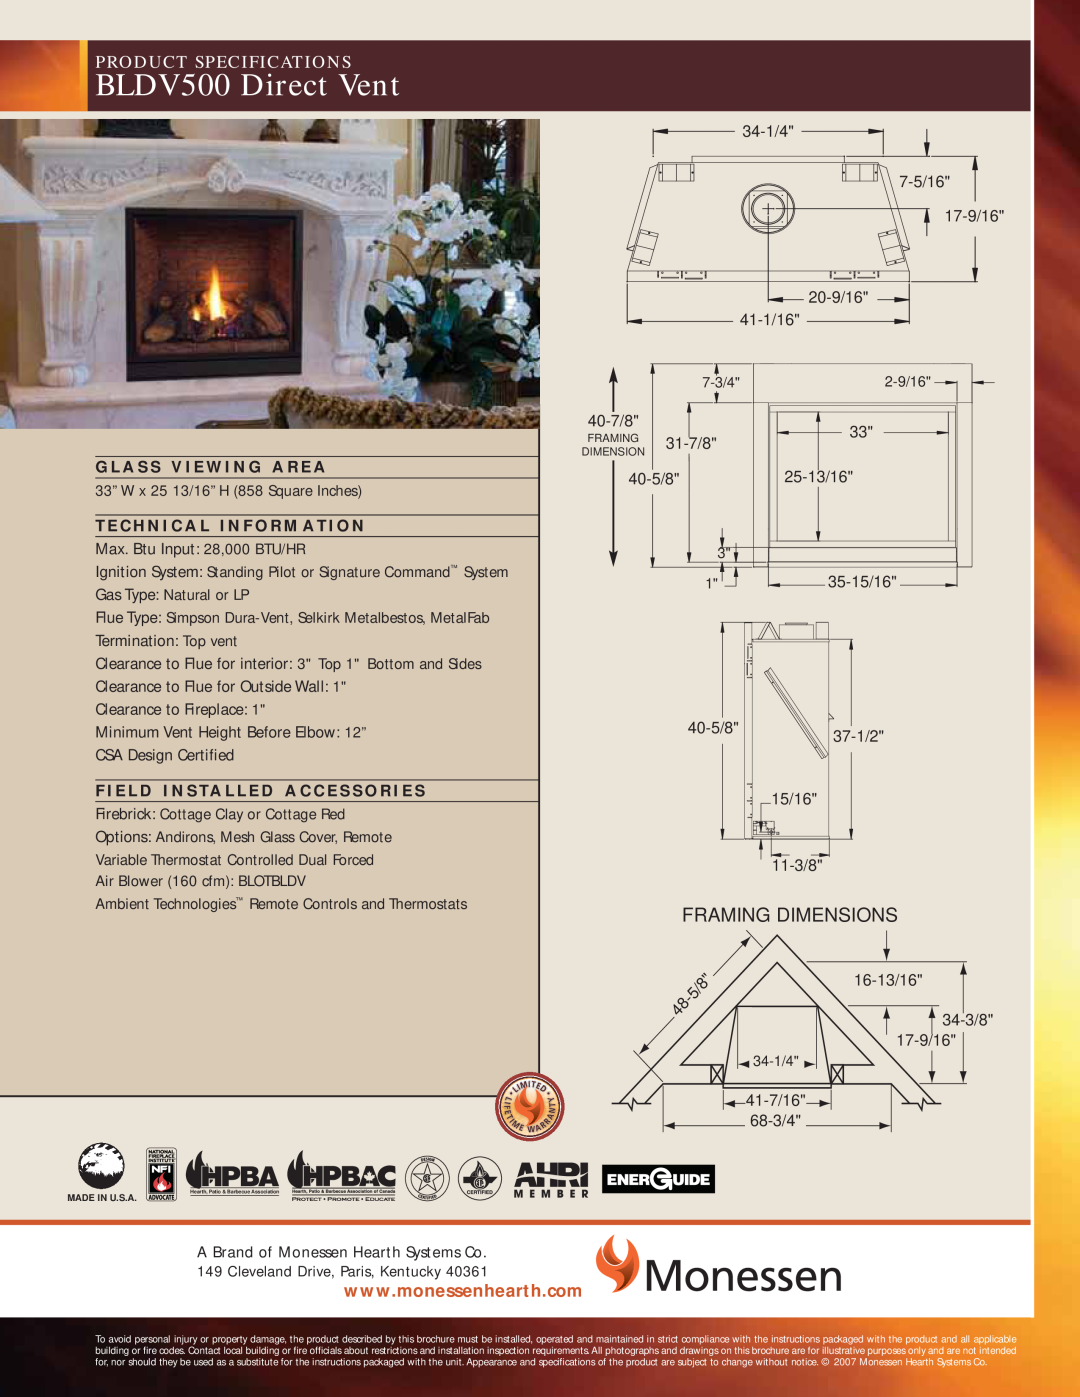 Monessen Hearth dimensions BLDV500 Direct Vent, Framing Dimensions, Product Specifications 